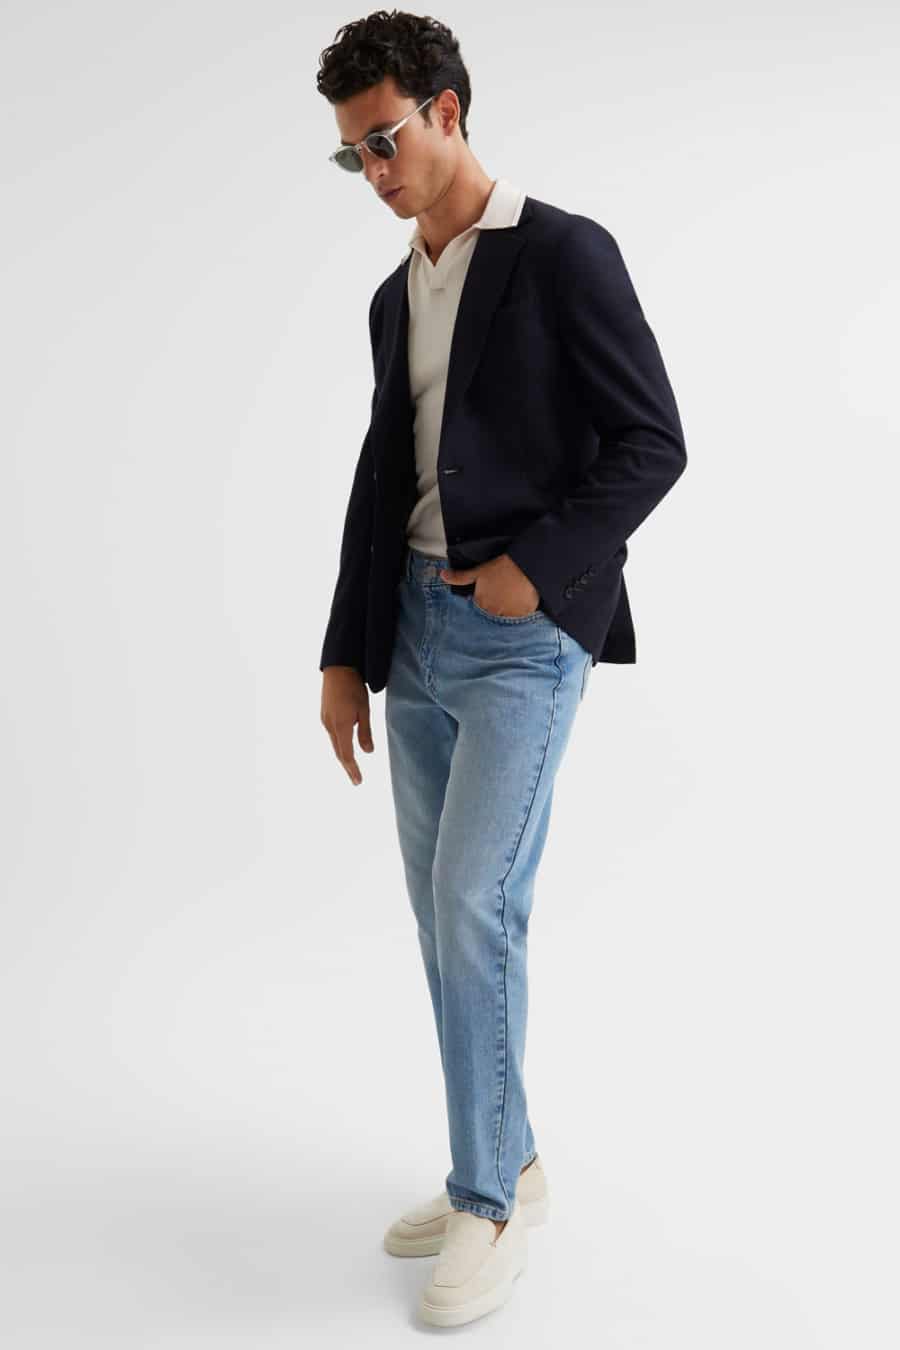 Men's light wash blue jeans, knitted polo shirt, navy unstructured blazer and suede loafers outfit